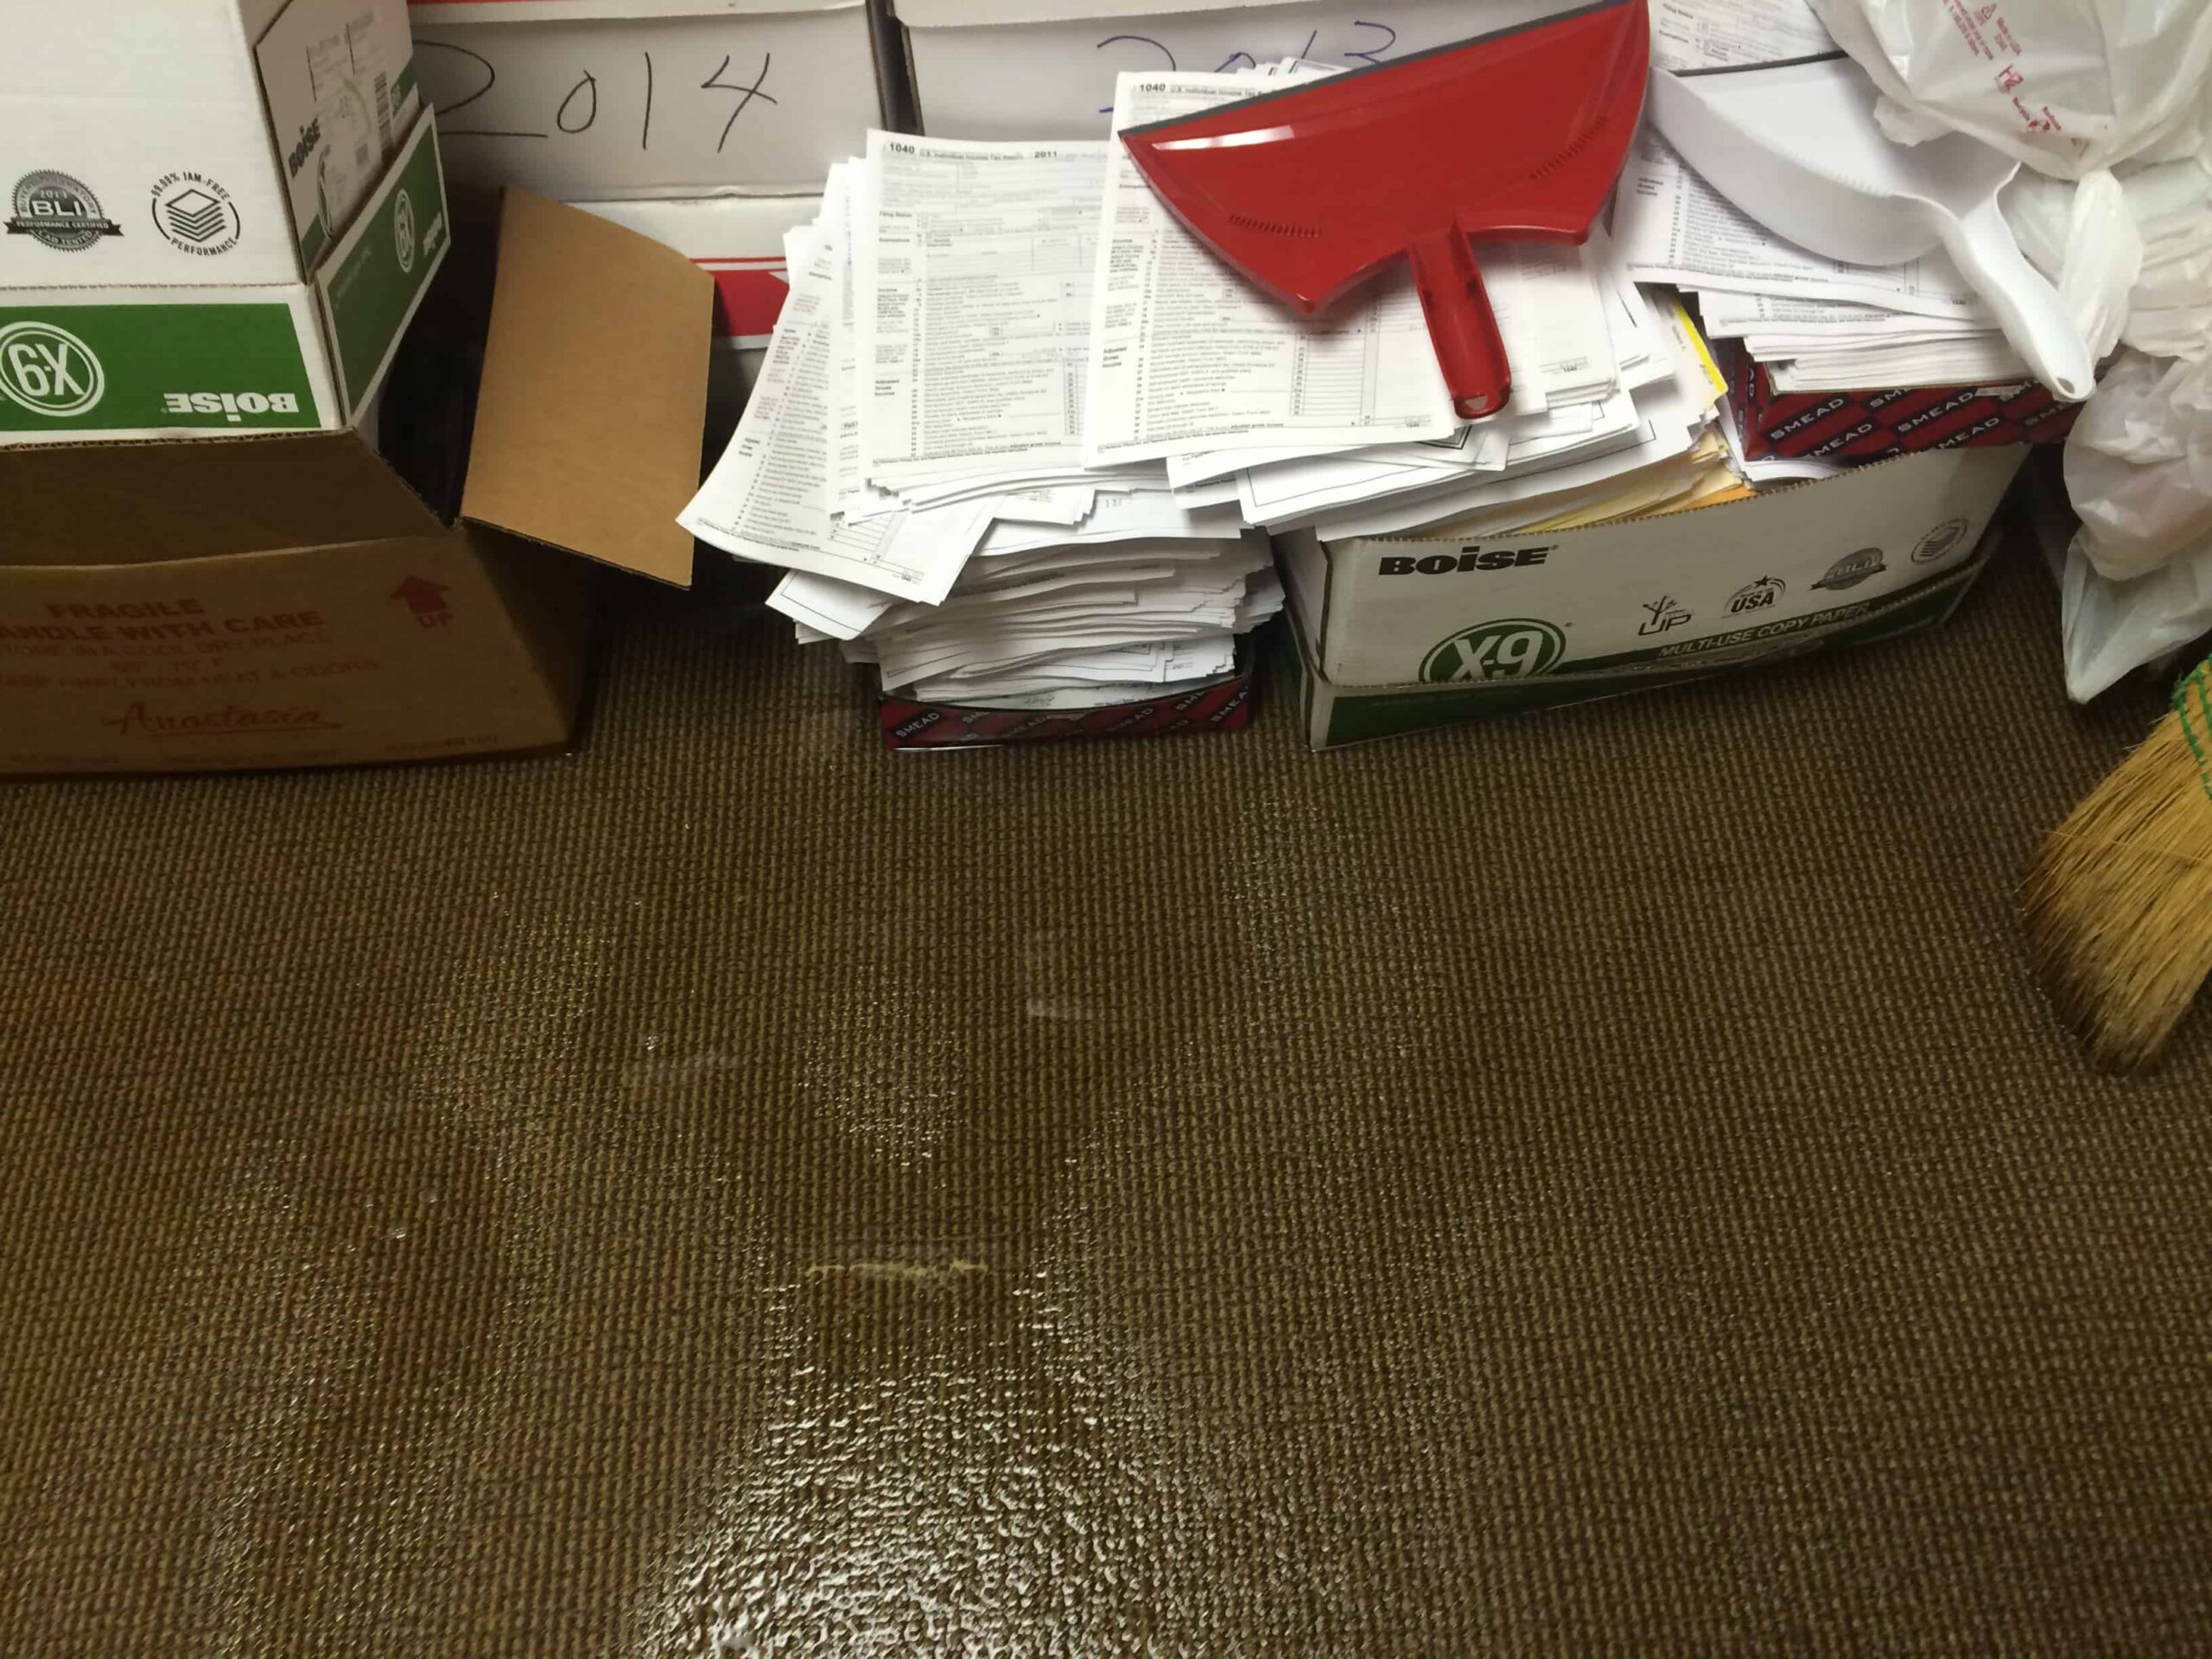 important documents on the floor in a box surrounded by water